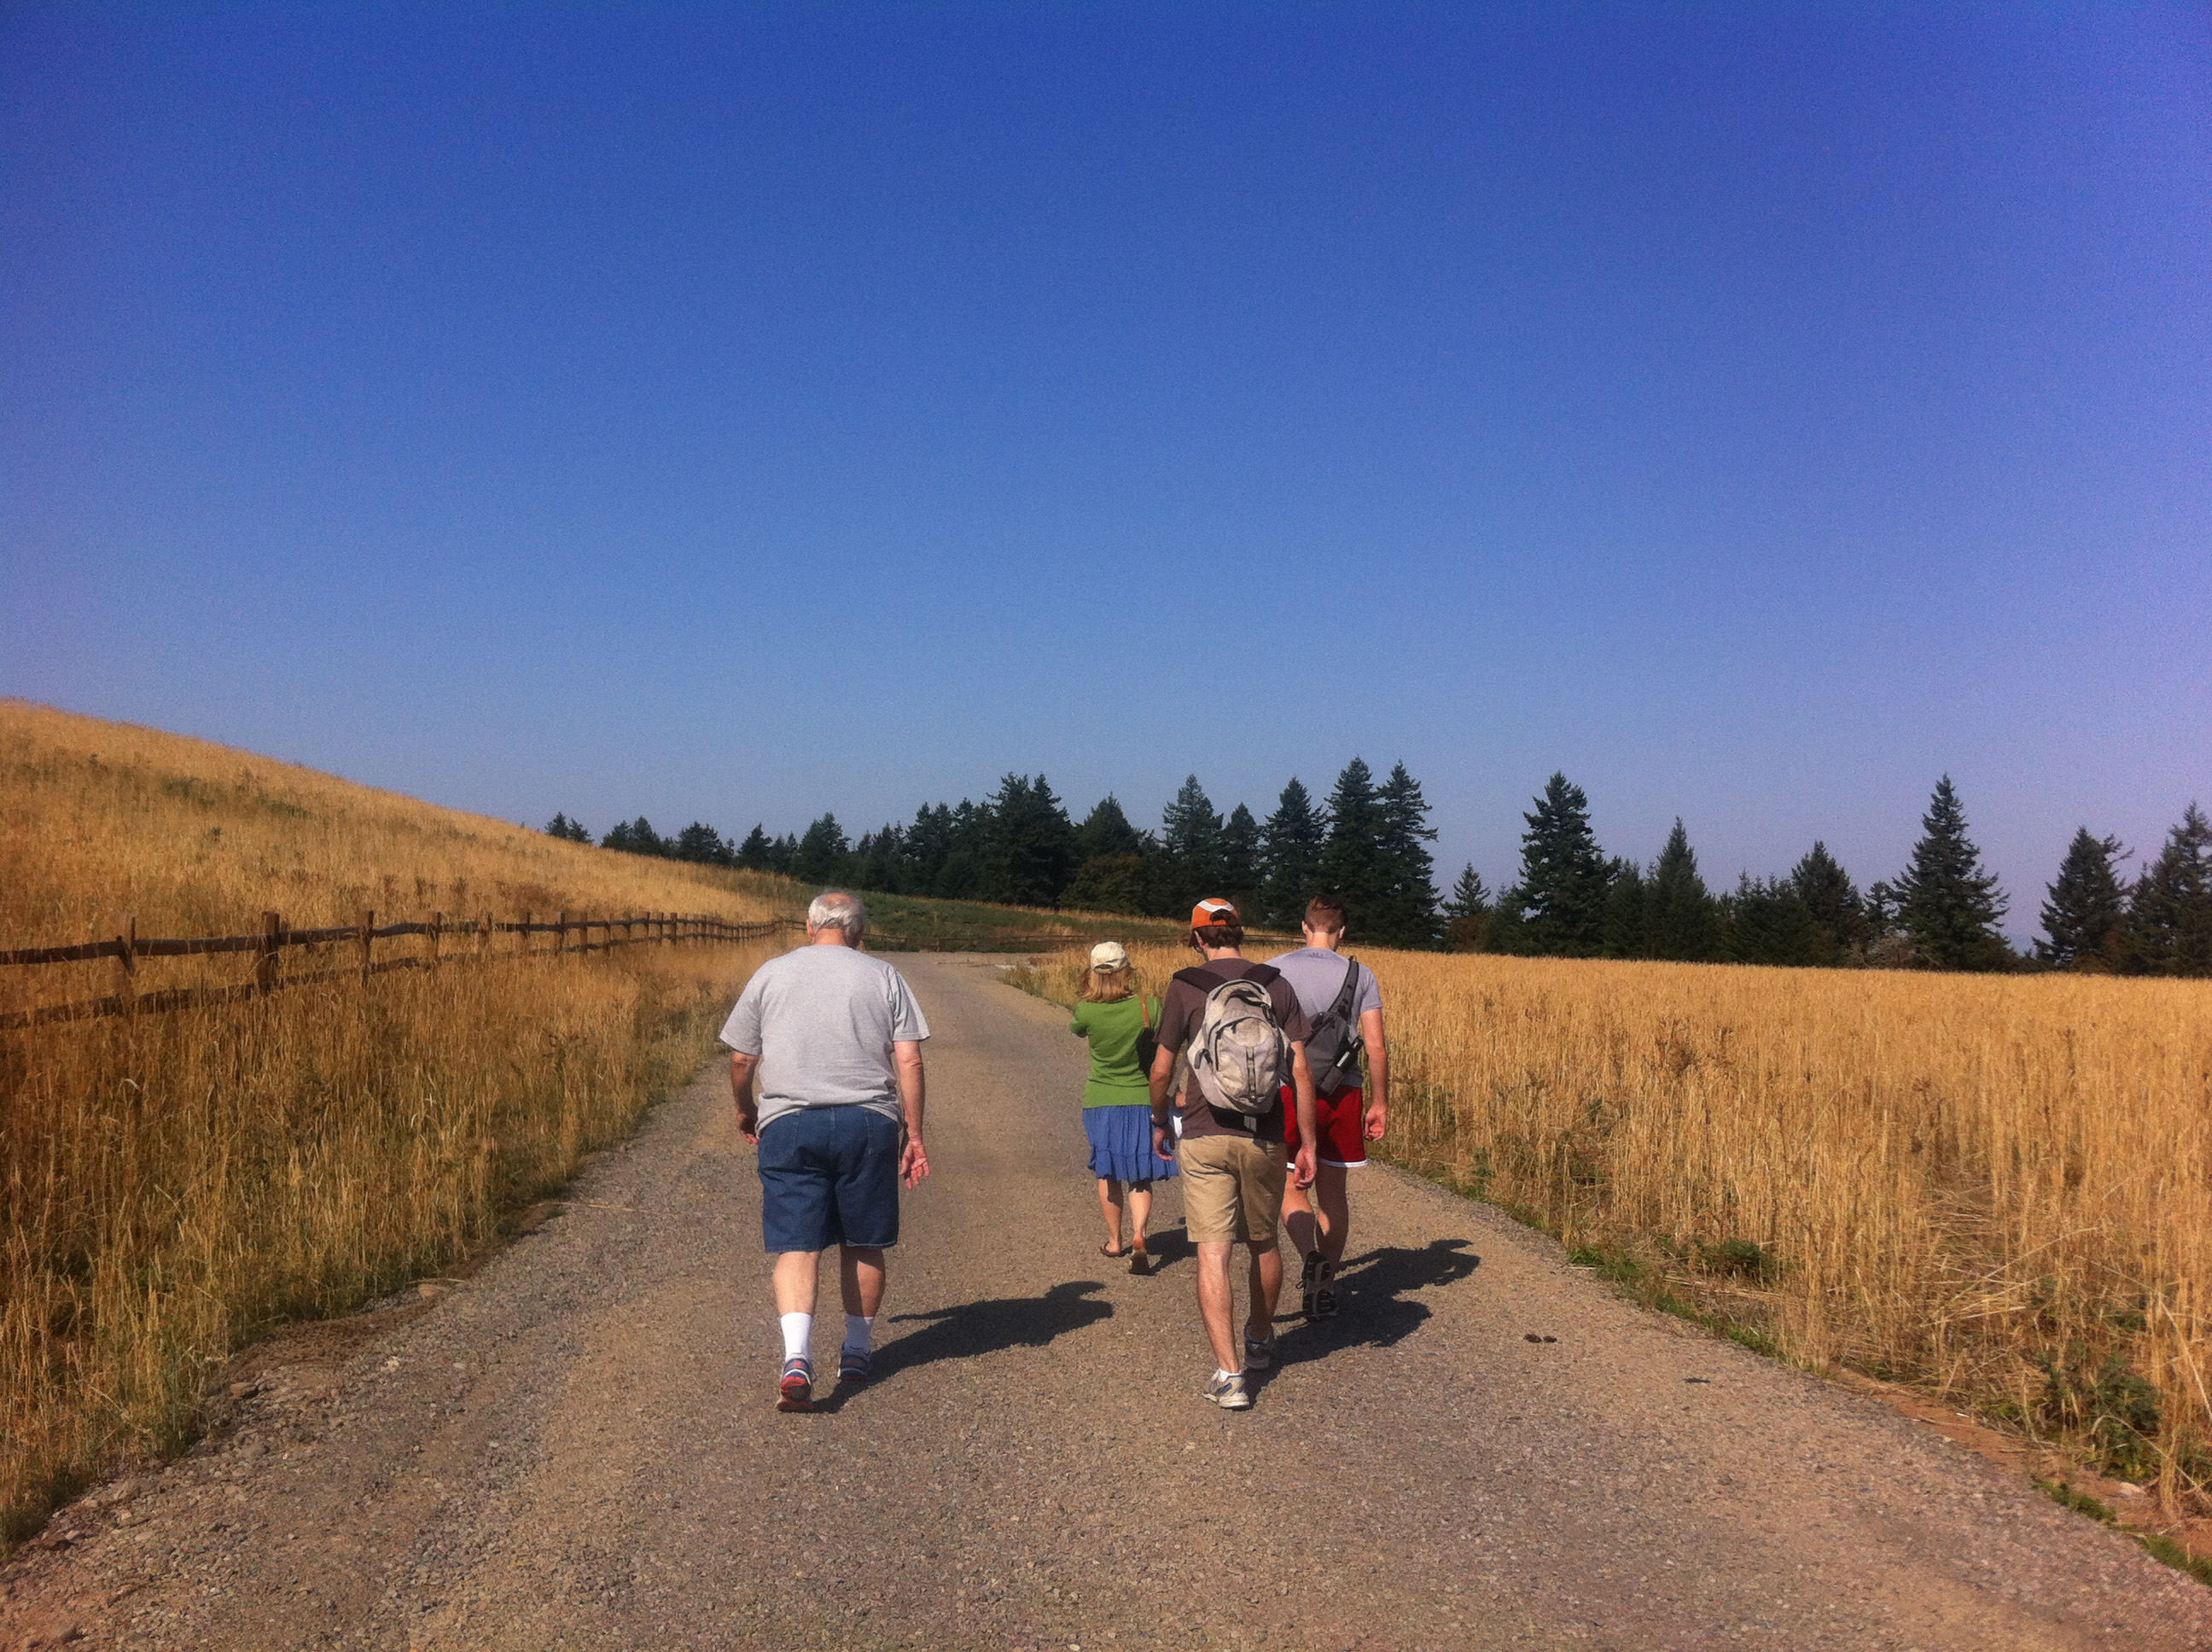 Members of Sellwood Faith Community in Portland, Ore., take a meditation hike in which participants take in nature and stop periodically to read Scripture and spiritual poetry. Photo courtesy of the Rev. Eilidh Lowery